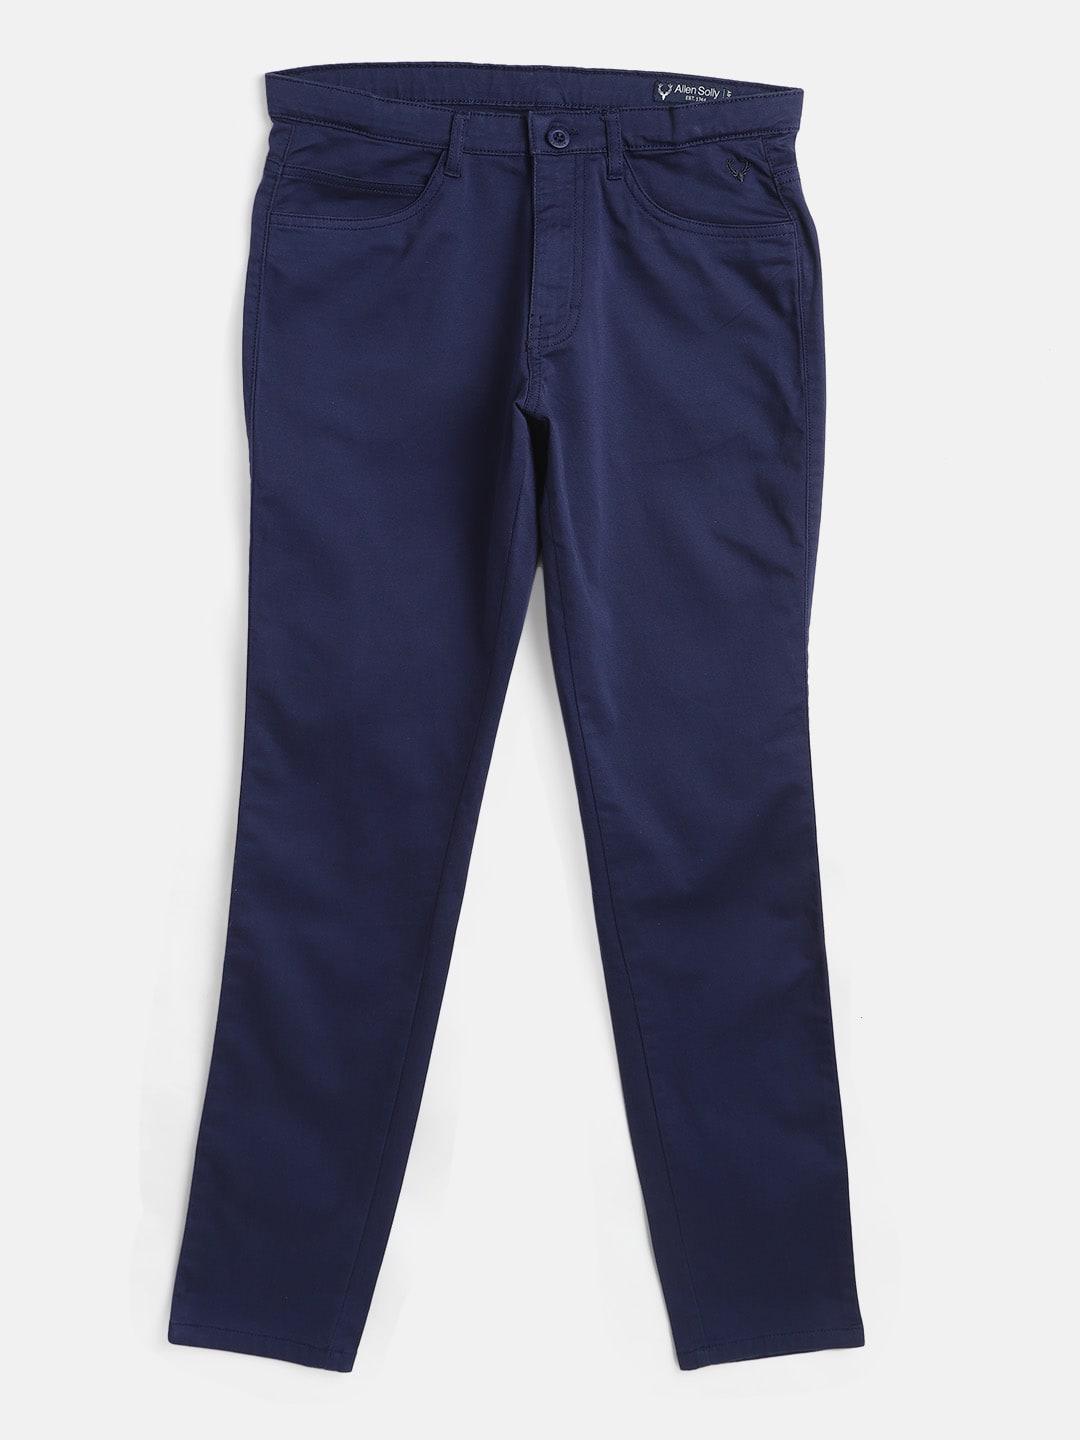 allen-solly-junior-boys-navy-blue-solid-cotton-slim-fit-trousers